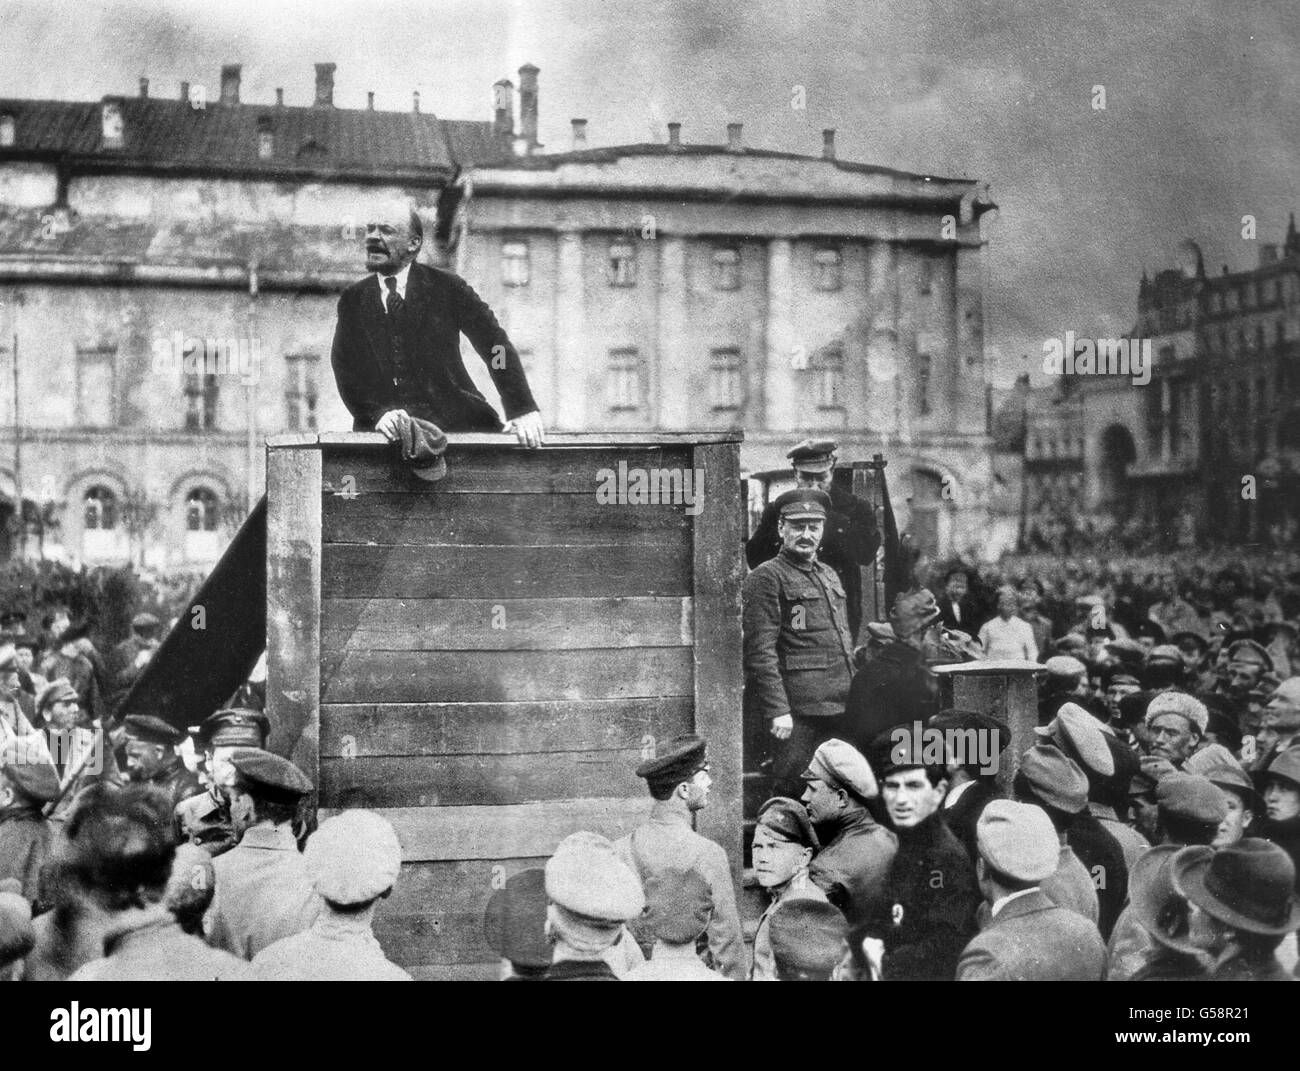 Lenin speech. Vladimir Lenin addressing a crowd of soldiers about to go to war in Poland in the Polish-Soviet War (1919-21), Sverdlov Square (now Theatre Square/Tetrainaya Square), Moscow, 5th May 1920. Leon Trotsky is on the podium to the right of Lenin. Stock Photo